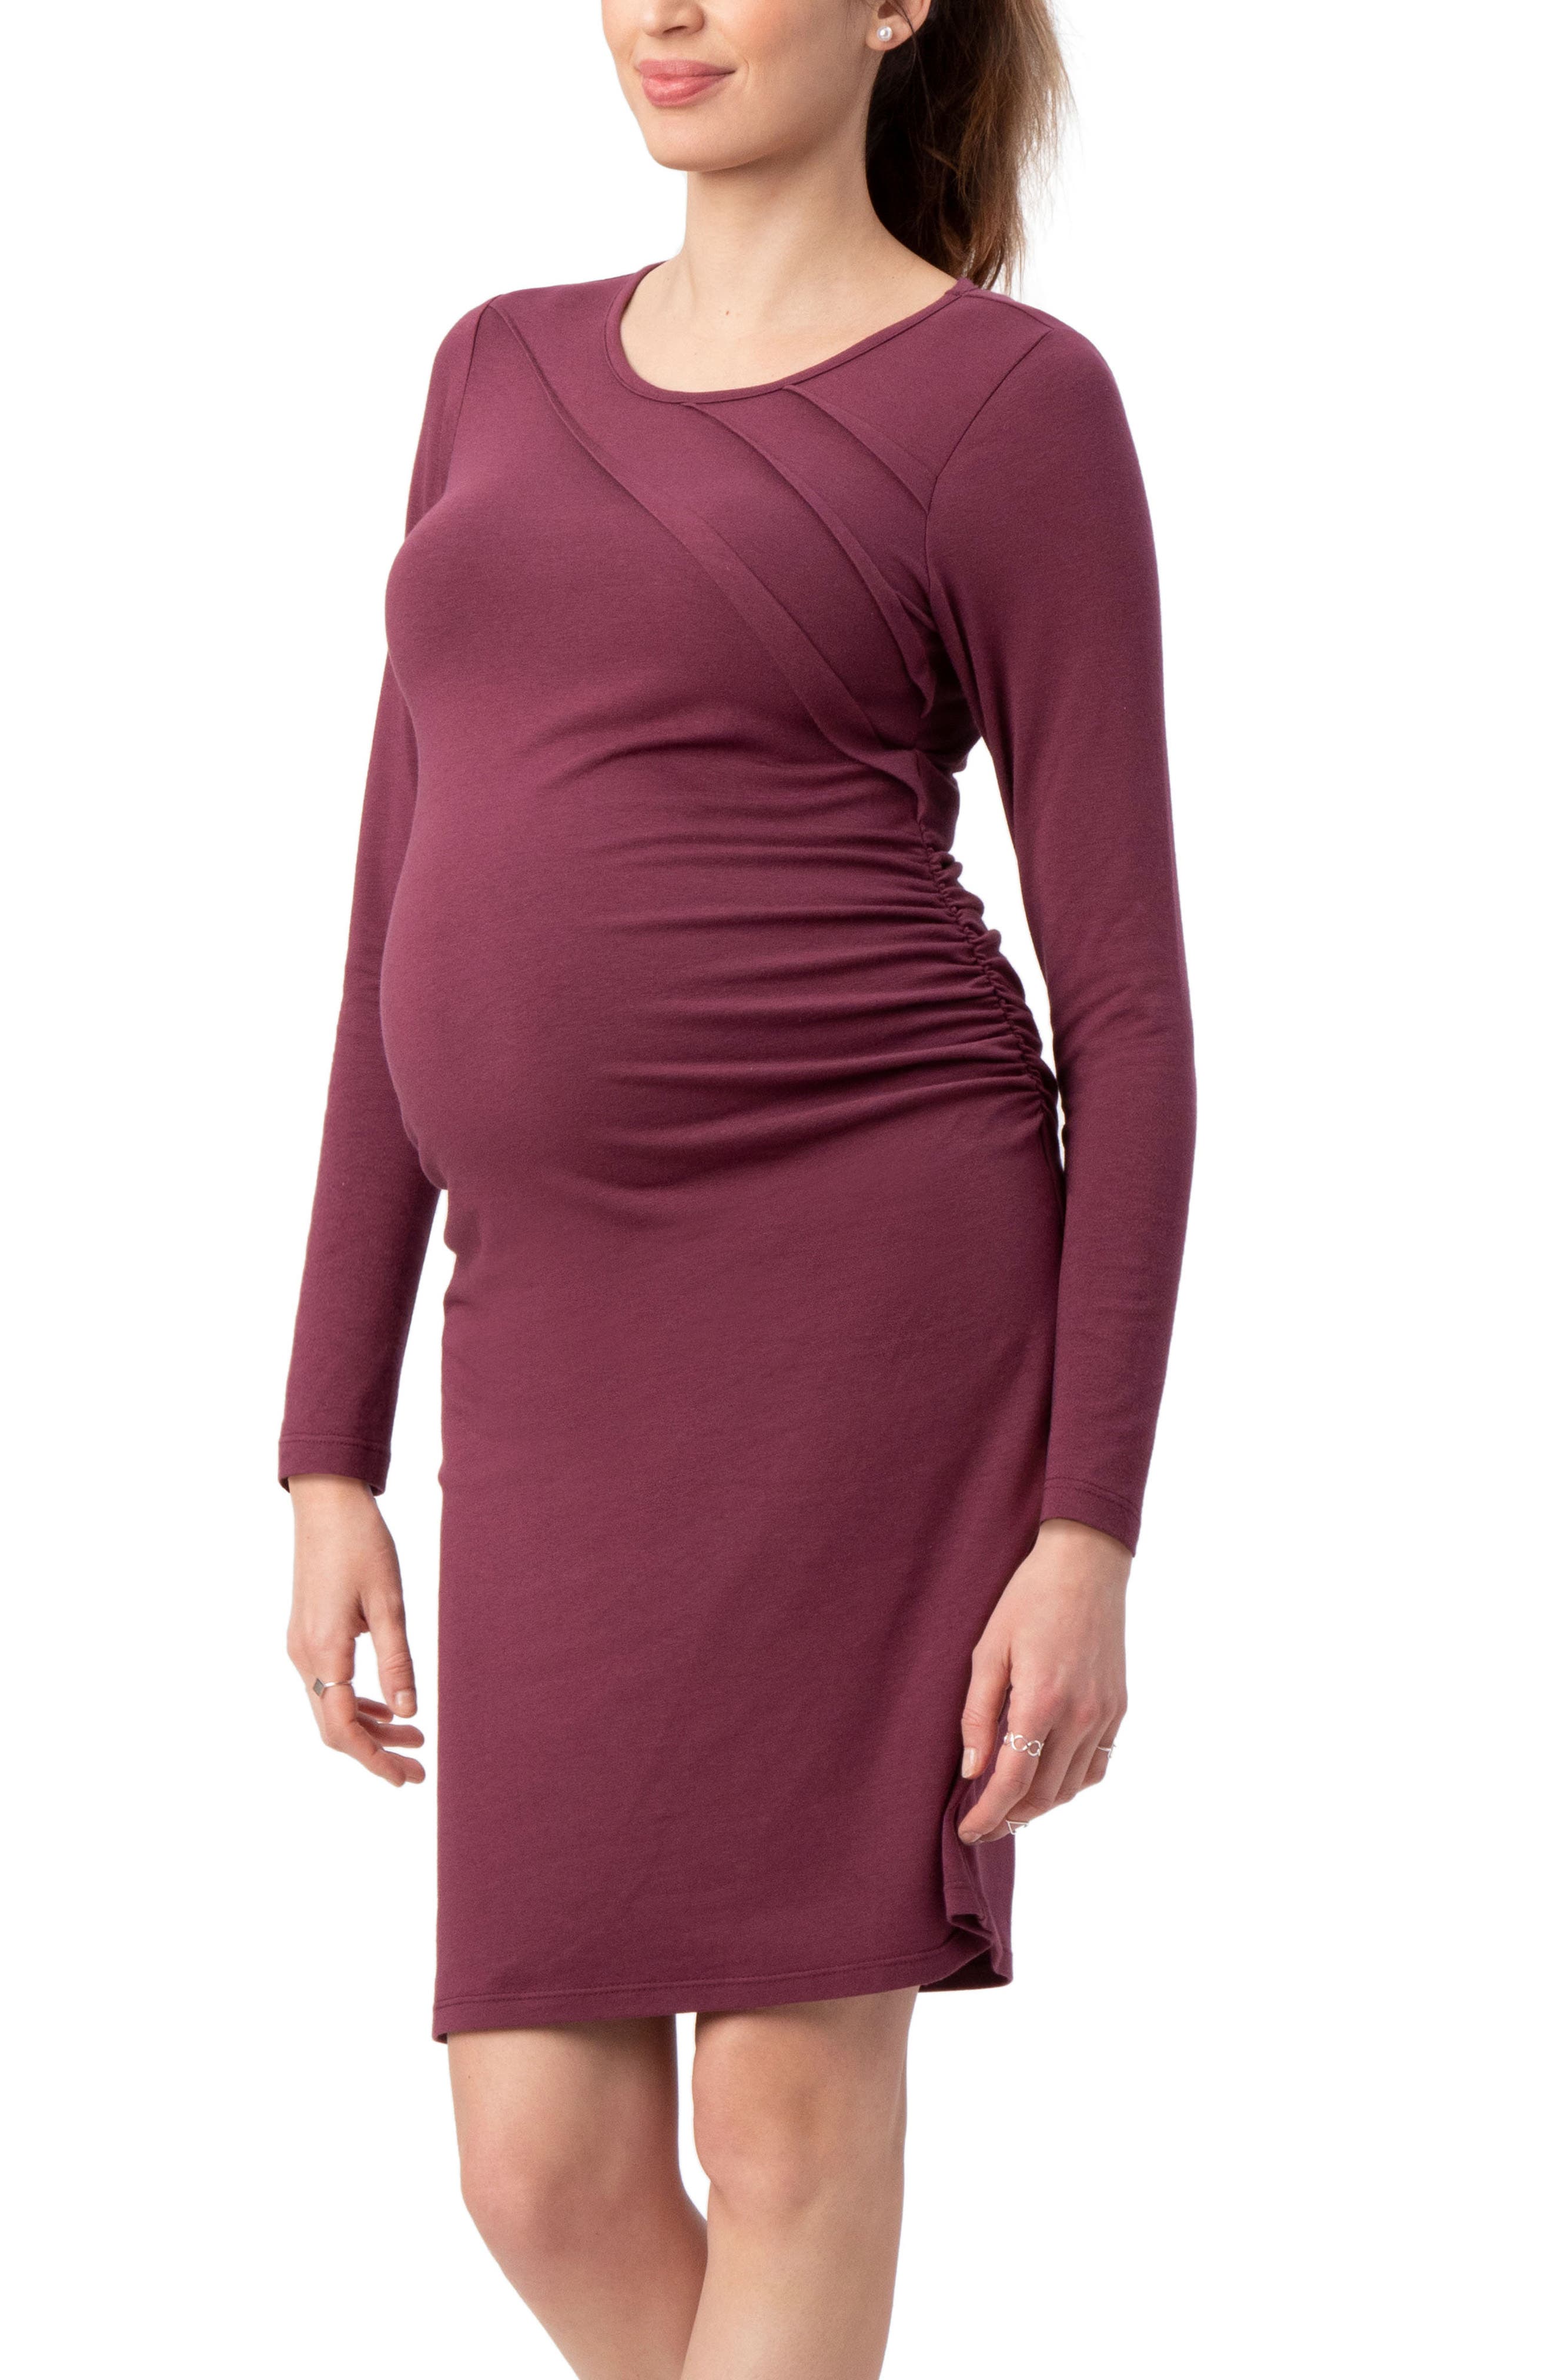 Stowaway Collection Sunburst Long Sleeve Body-con Maternity Dress In Wine At Nordstrom, Size Medium